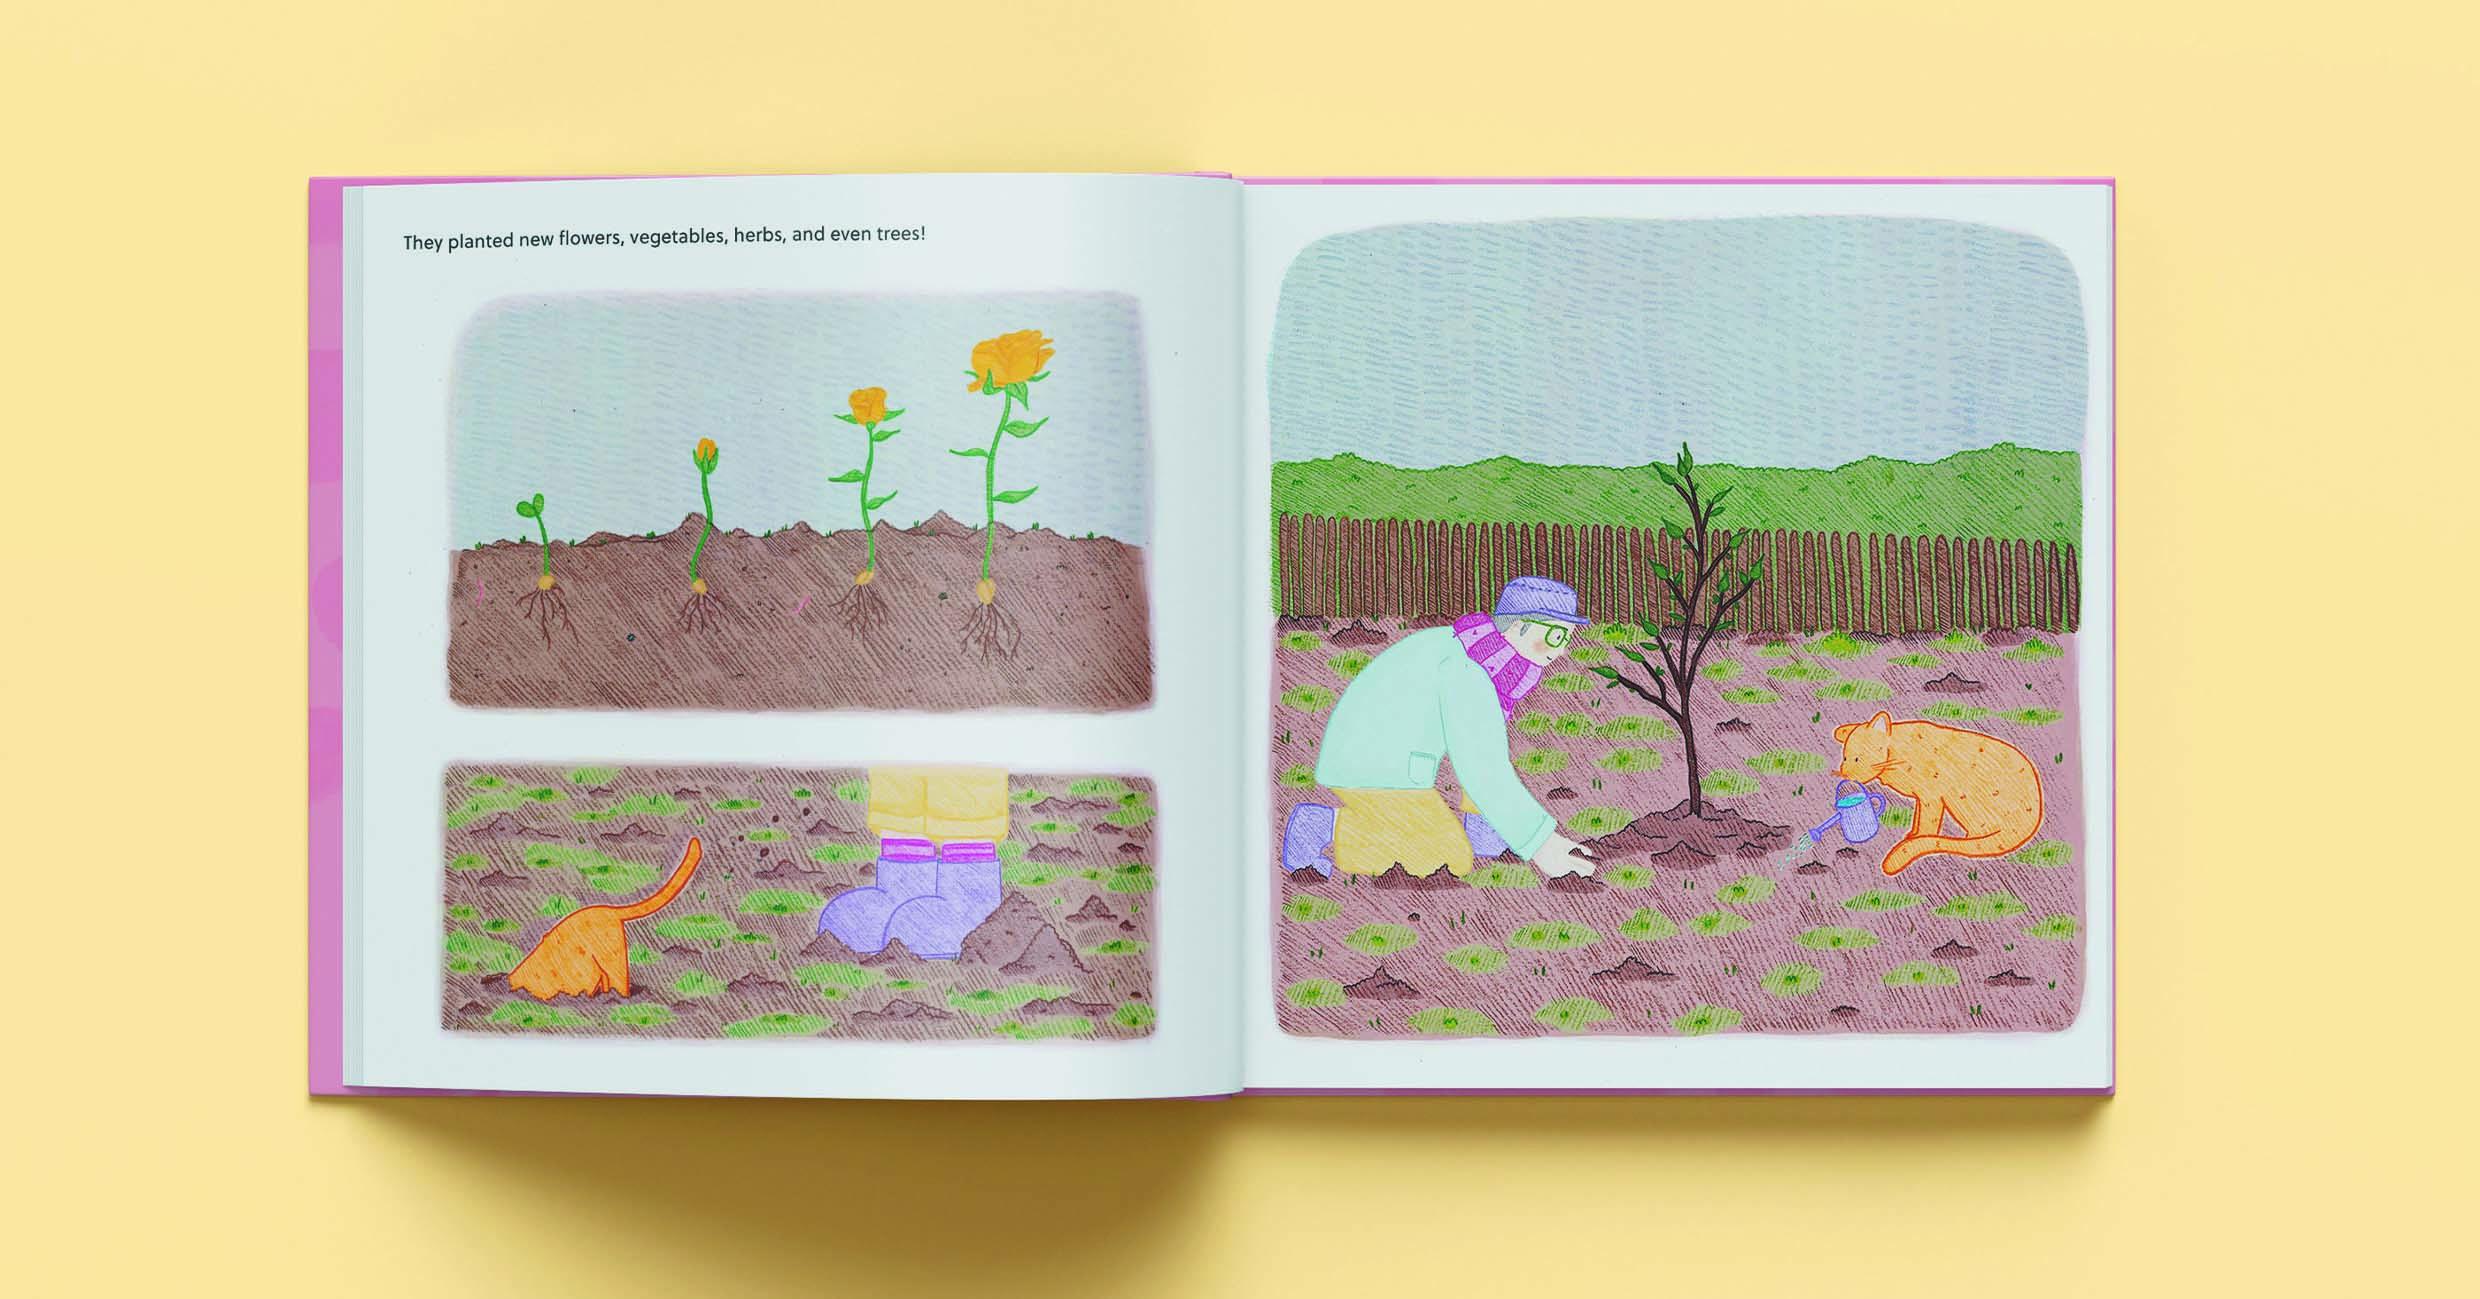 Digital mock-up of the inside pages of a picture book, containing the Cat and Old Man rebuilding a garden and planting a tree.